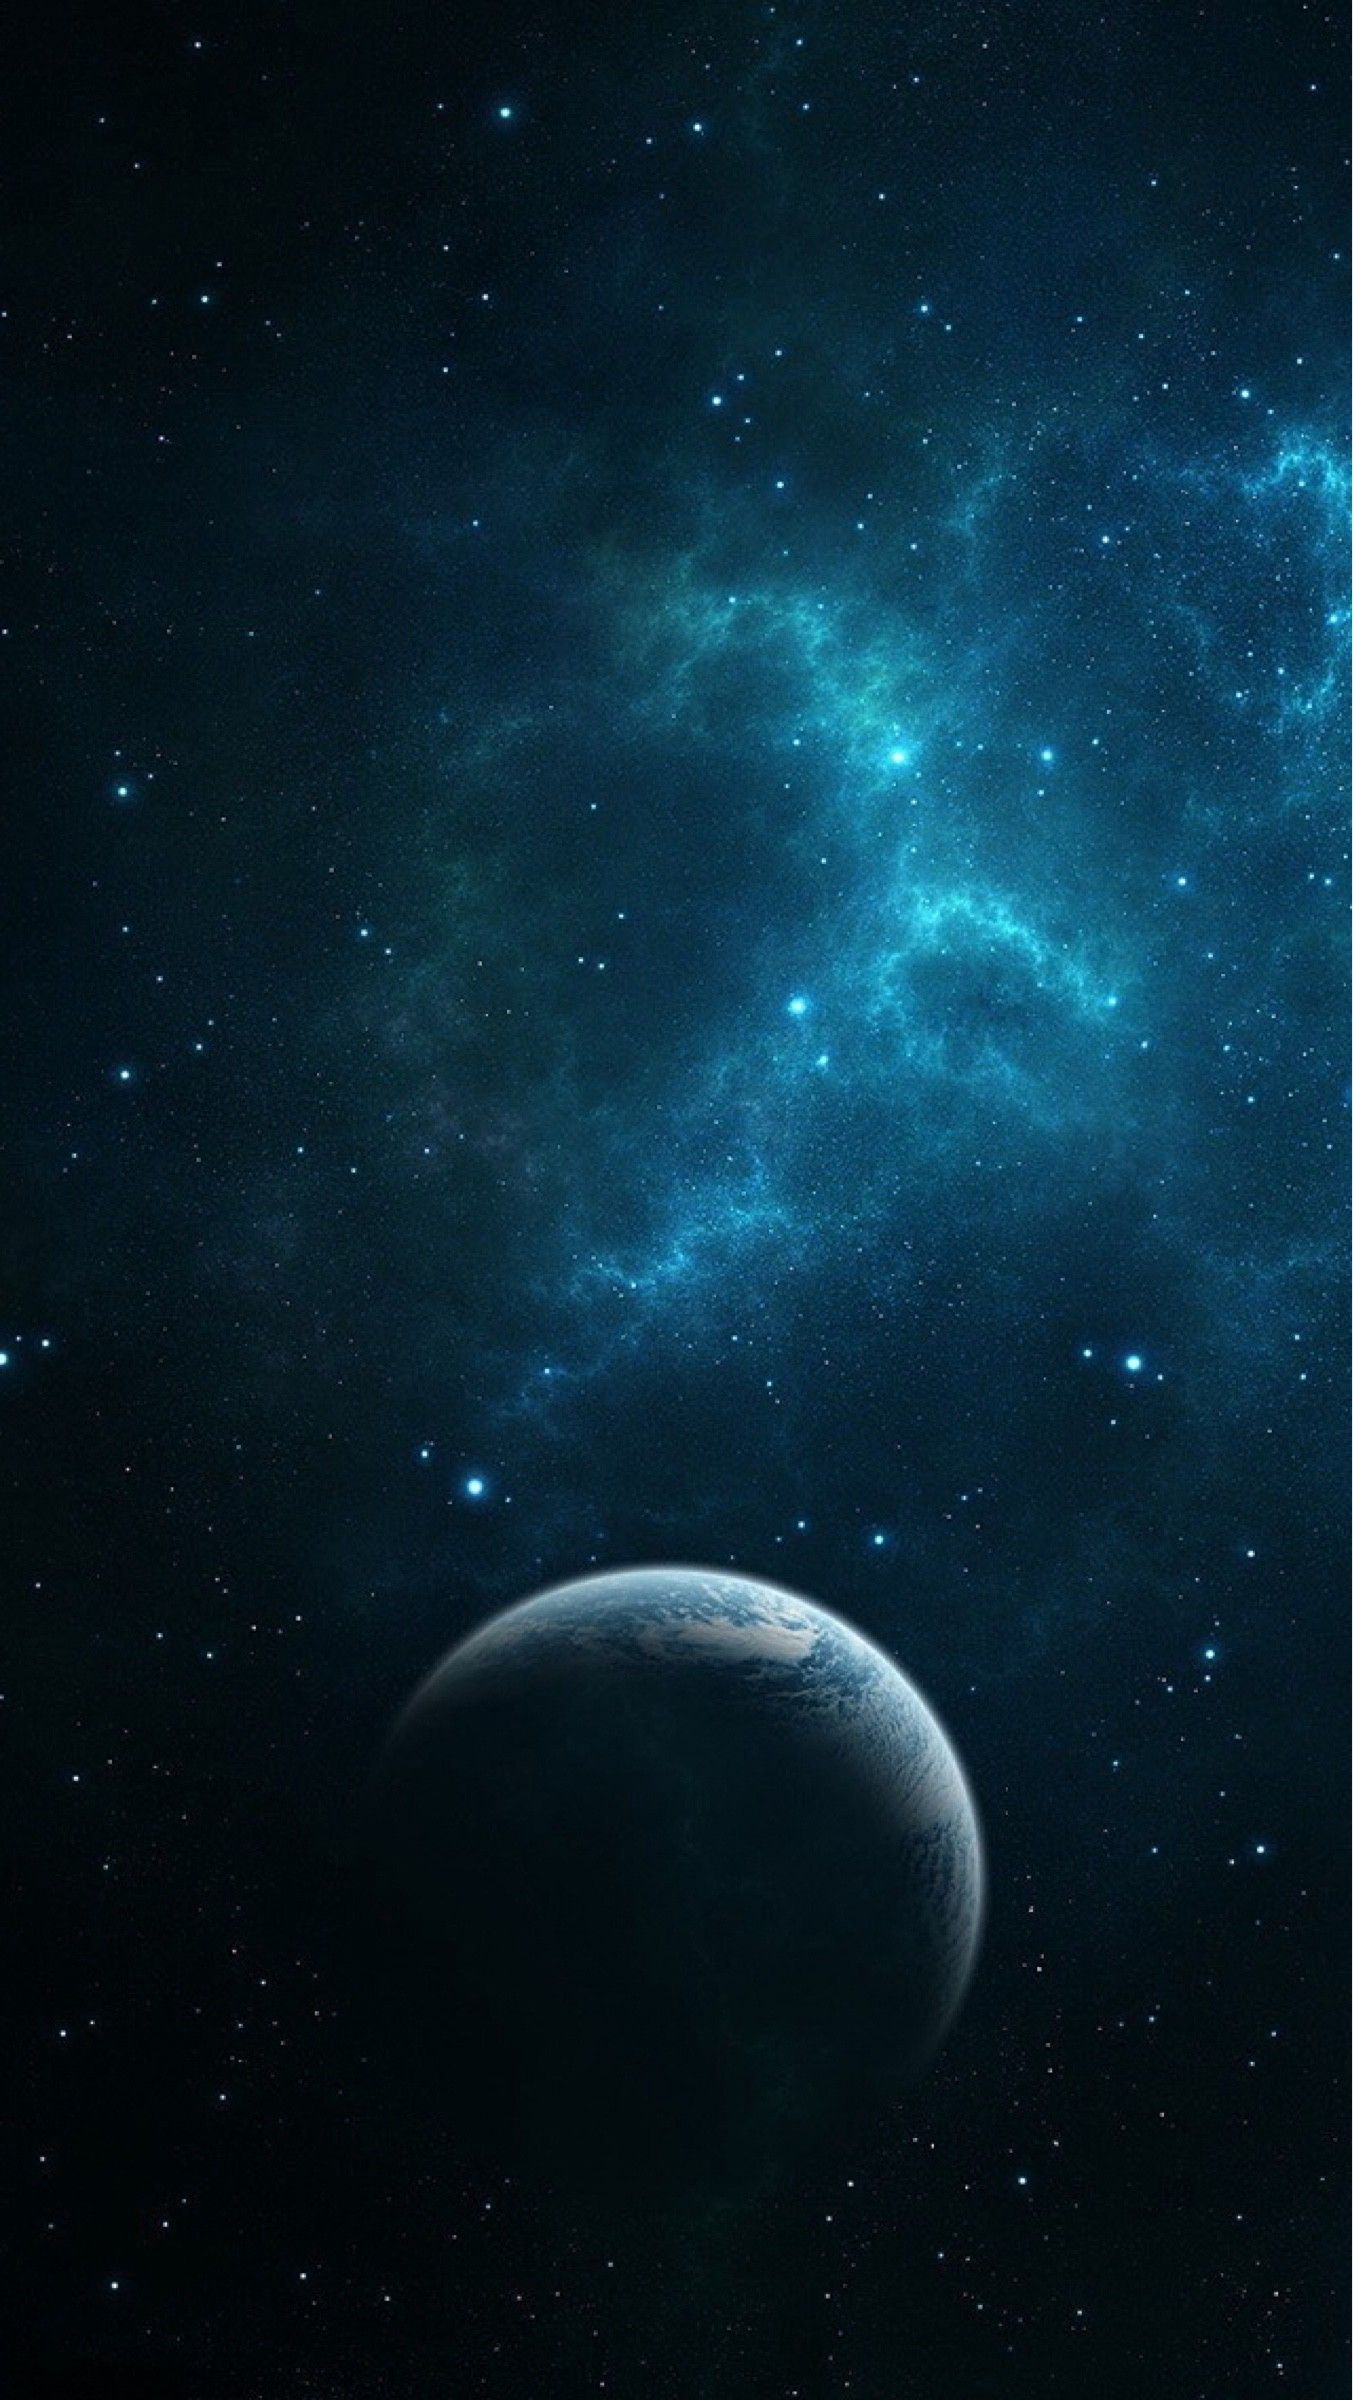 My Best iPhone Wallpaper. Well, what is your favorit smartphone